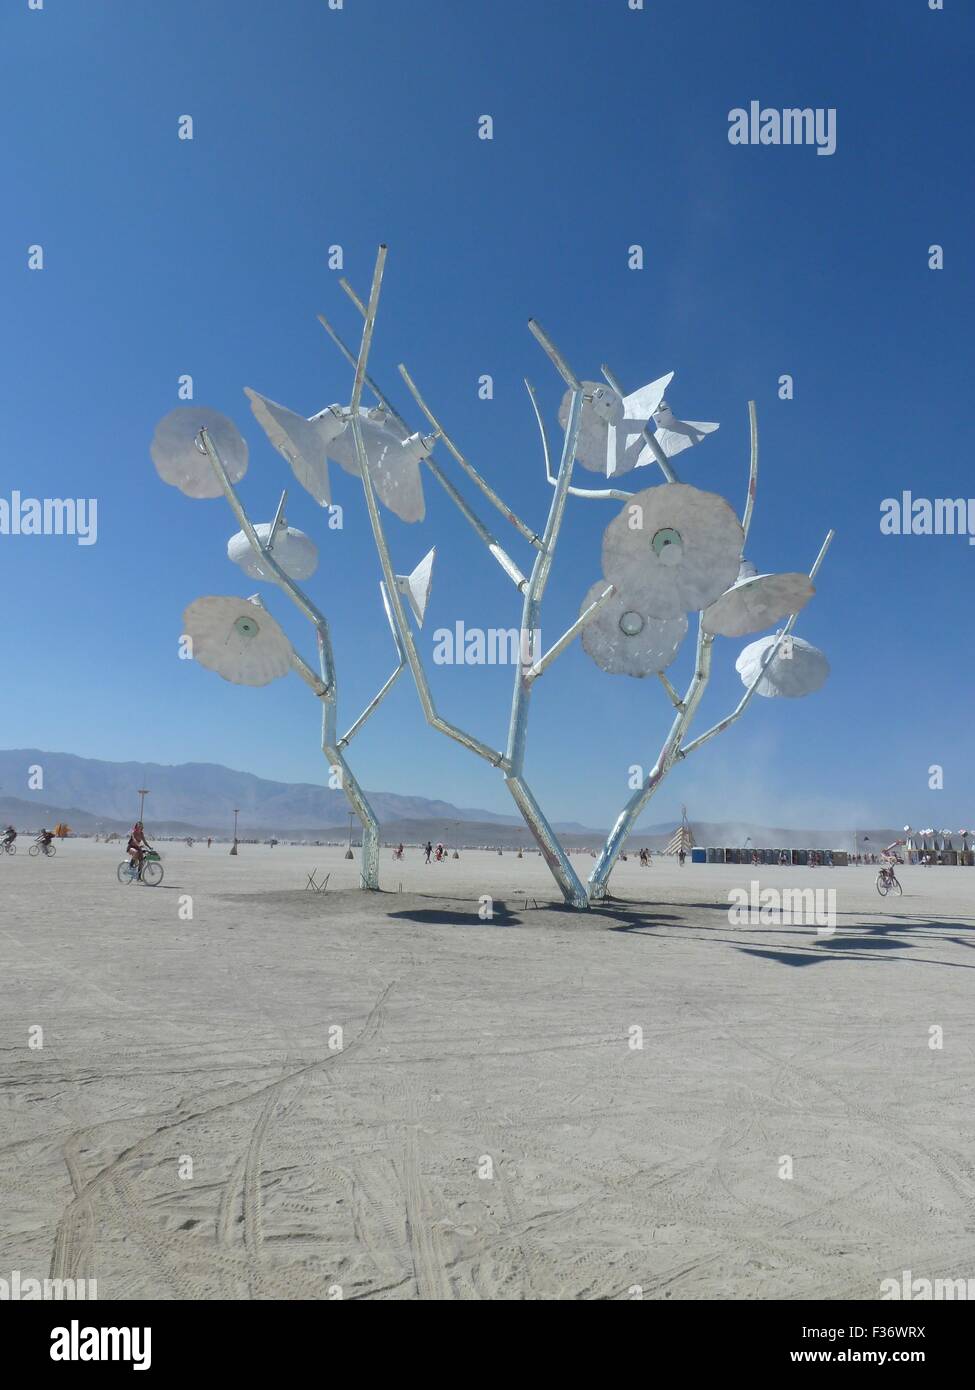 An art installation in the playa during the annual Burning Man festival in the desert August 30, 2012 in Black Rock City, Nevada. Stock Photo